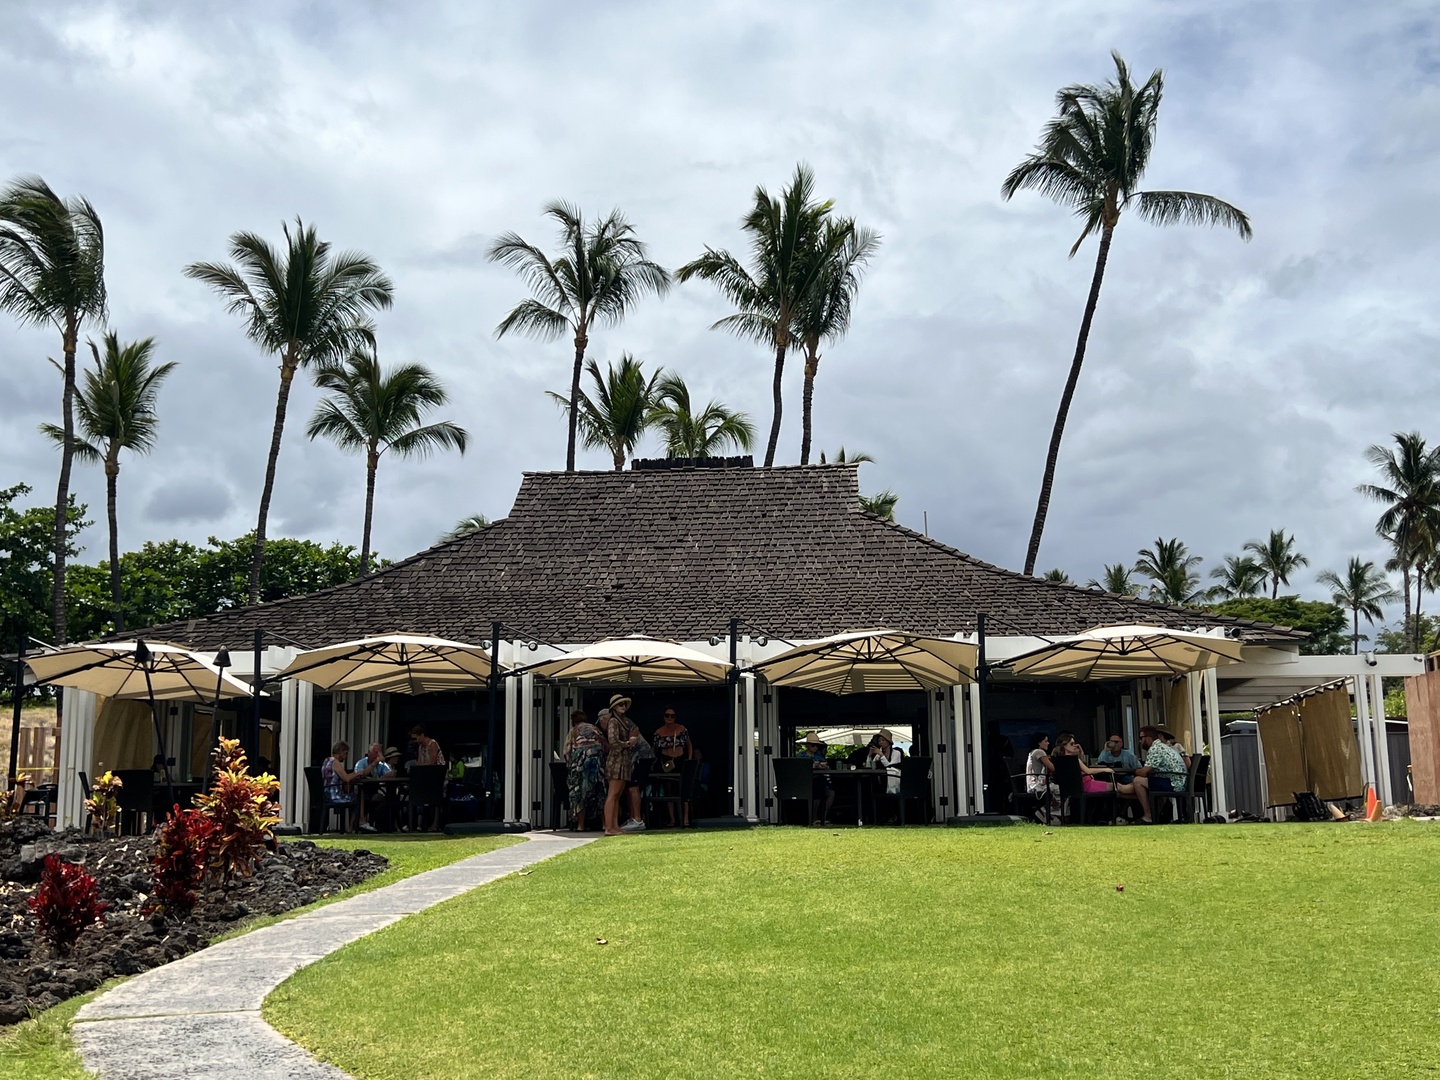 Kamuela Vacation Rentals, Palm Villas E1 - Dine Amidst the Breezes at Our Open-Air Beachside Restaurant, Where the Waves Serenade Every Bite.